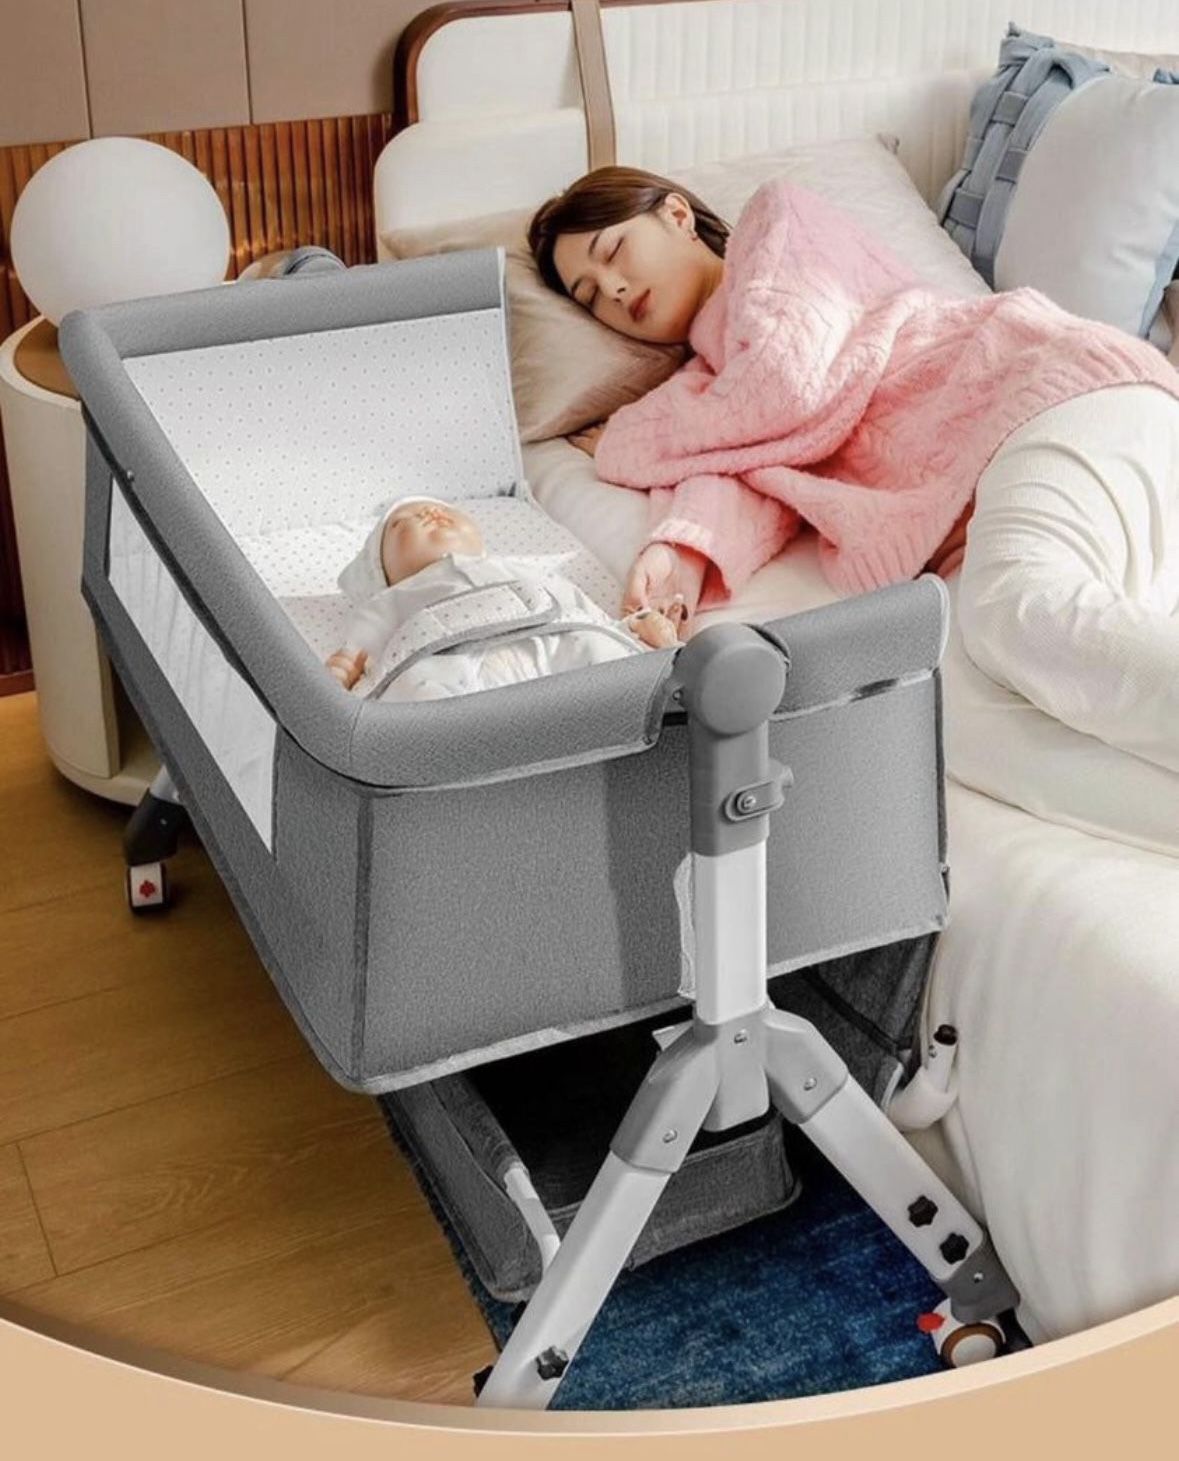 Baby Crib, Easy Folding Portable Crib, Bedside Bassinet, Adjustable Height,Comfy Mattress Included,